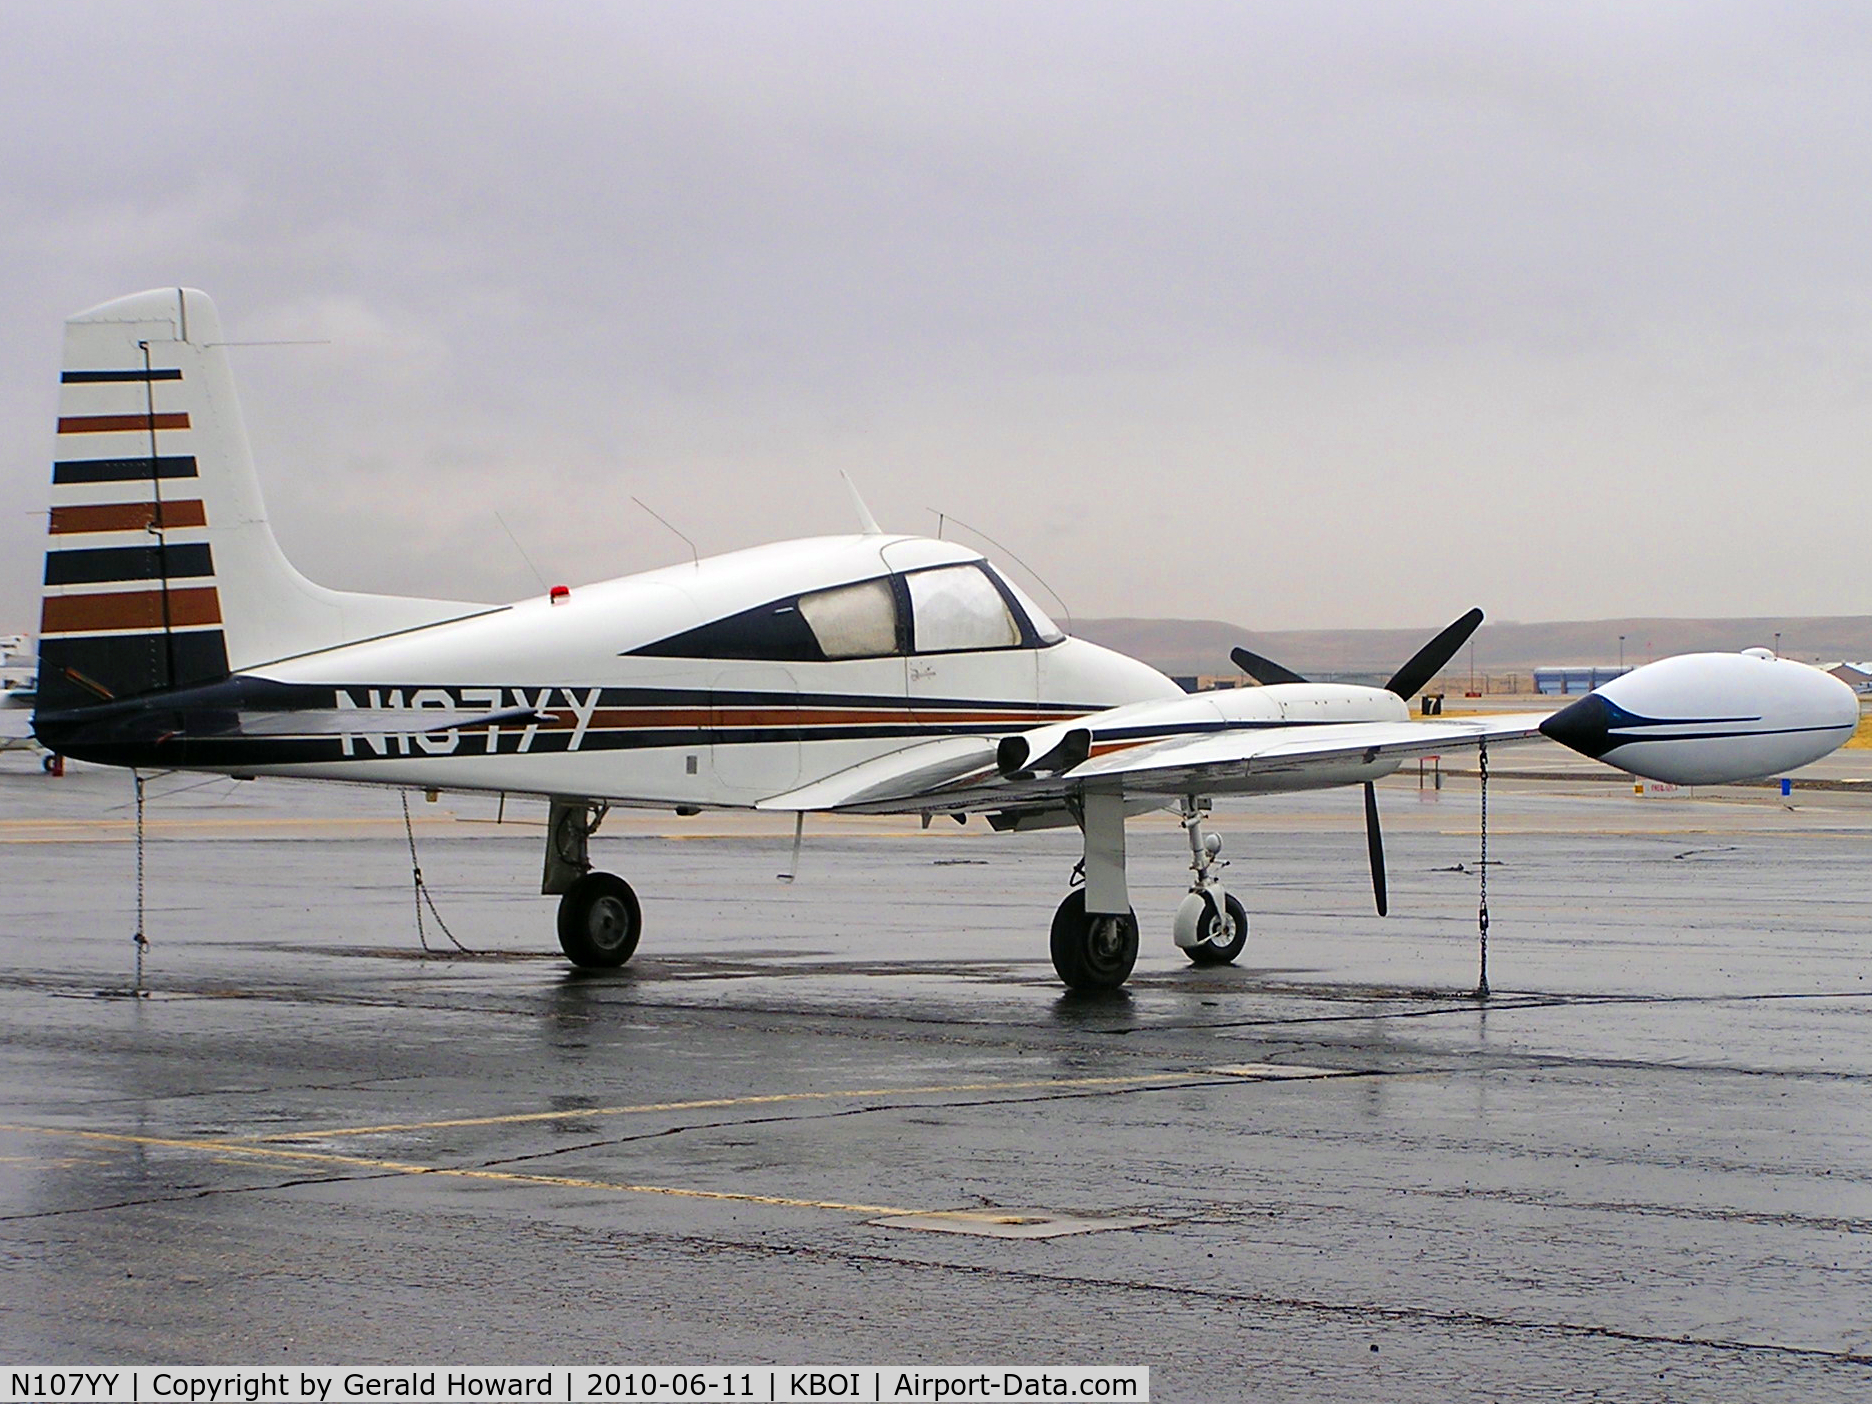 N107YY, 1956 Cessna 310 C/N 35266, Here for annual inspection.